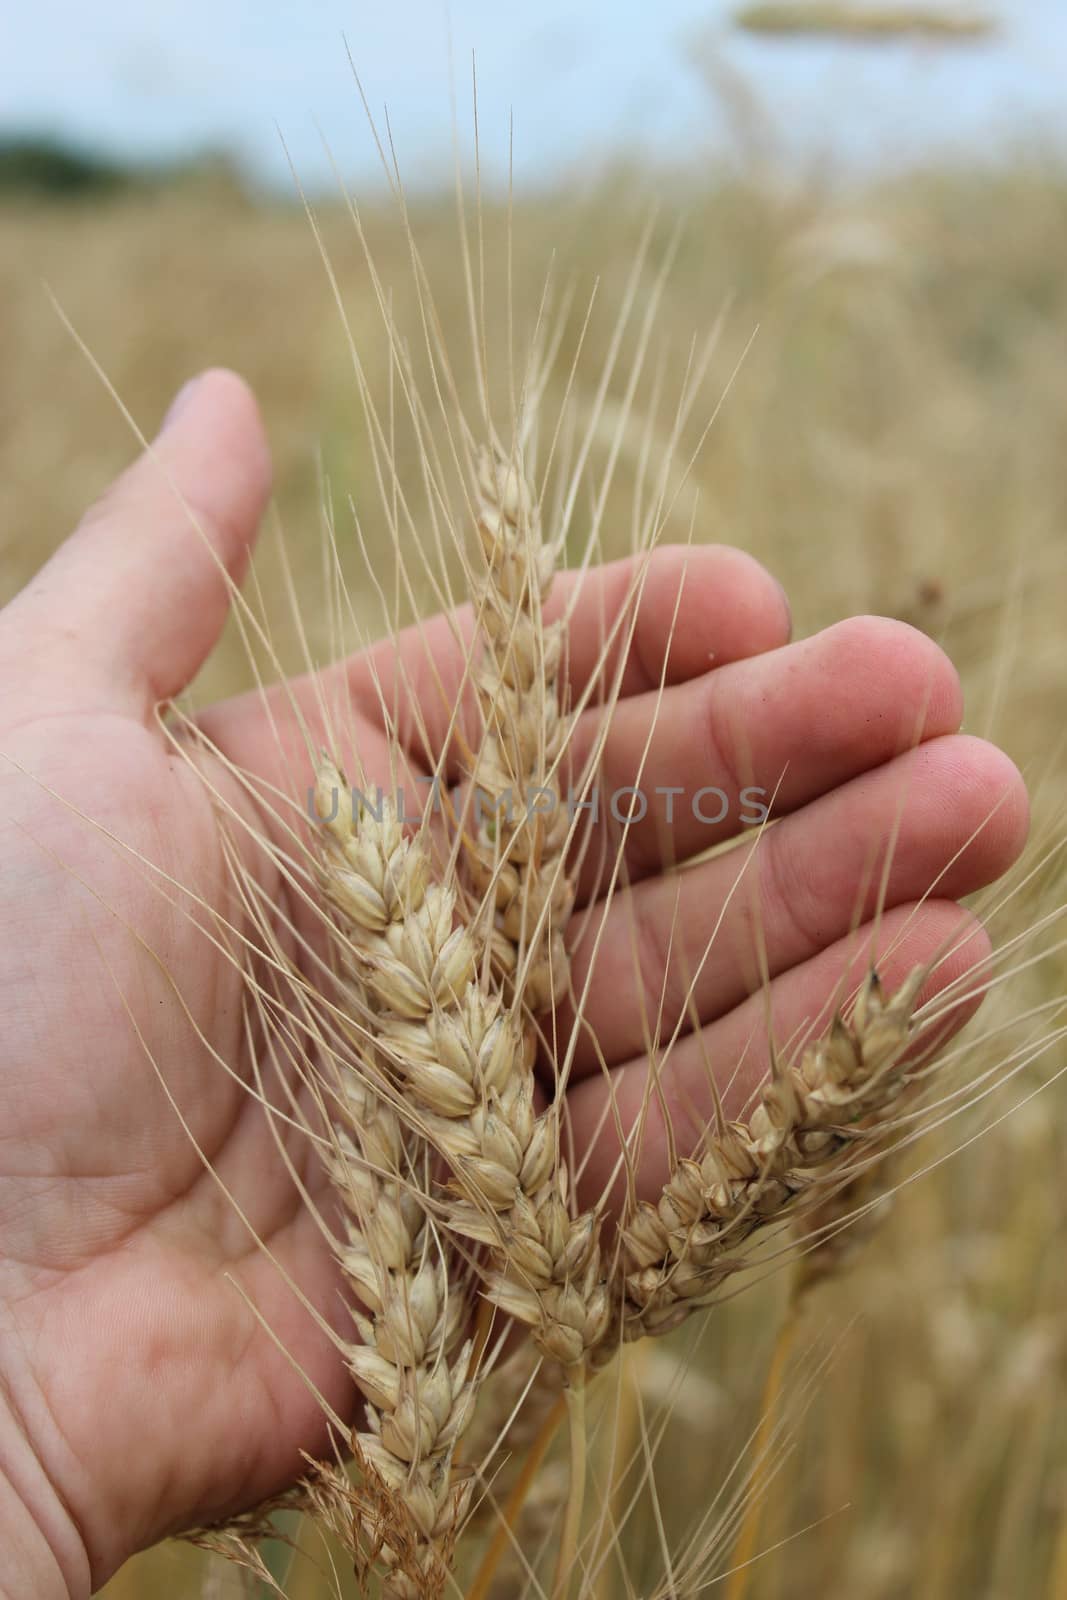 spikelets of the wheat in the hand by alexmak